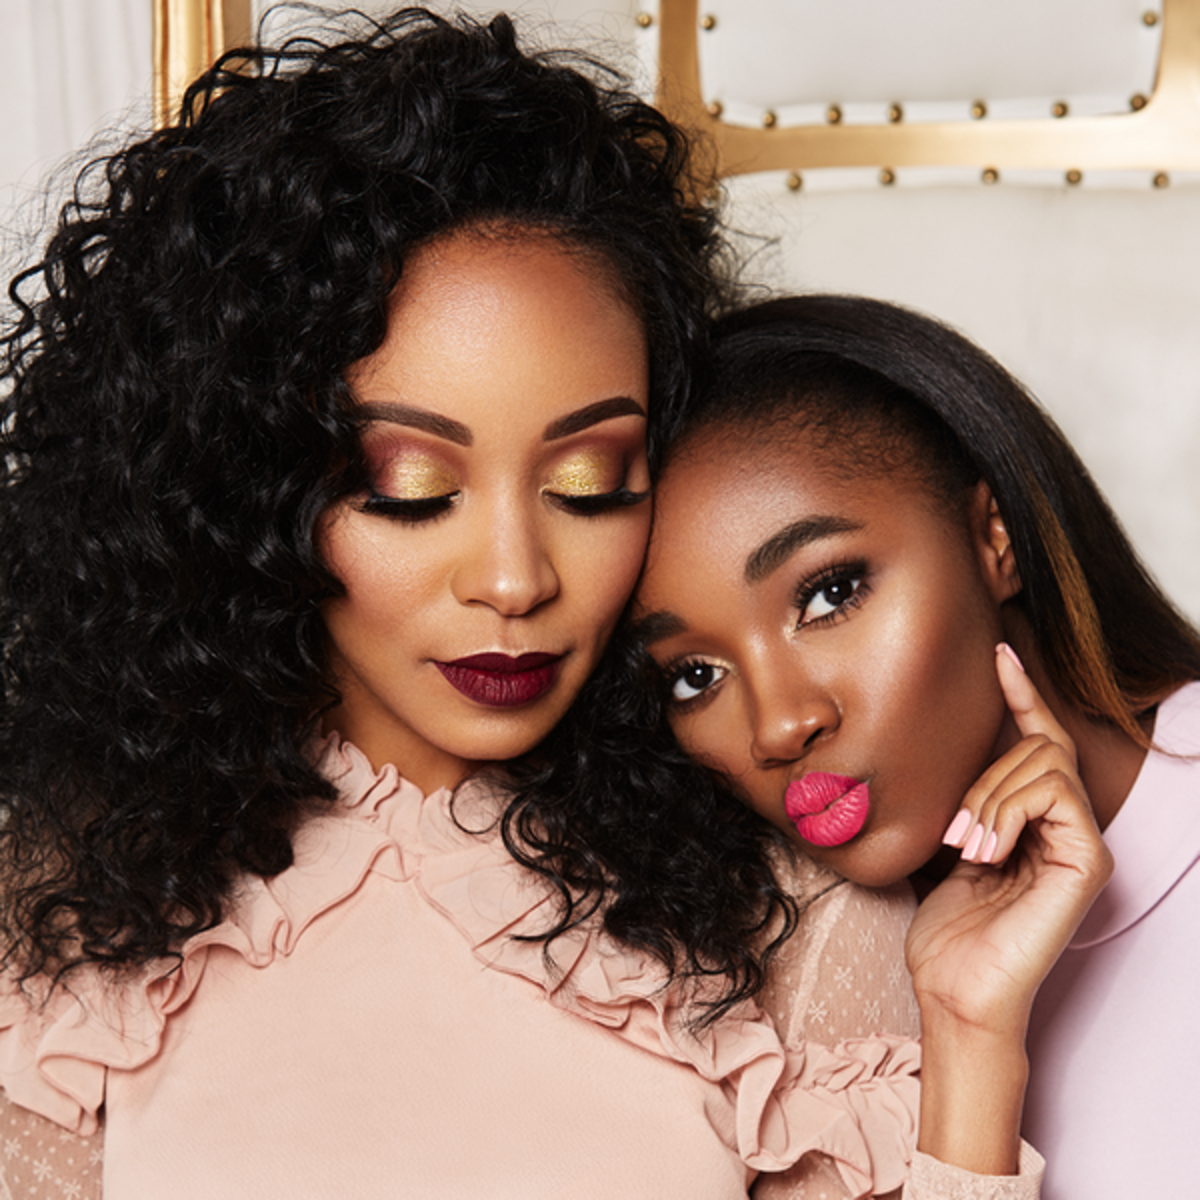 Beauty Bakerie founder Cashmere Nicole with her daughter. Photo: Courtesy of Beauty Bakerie